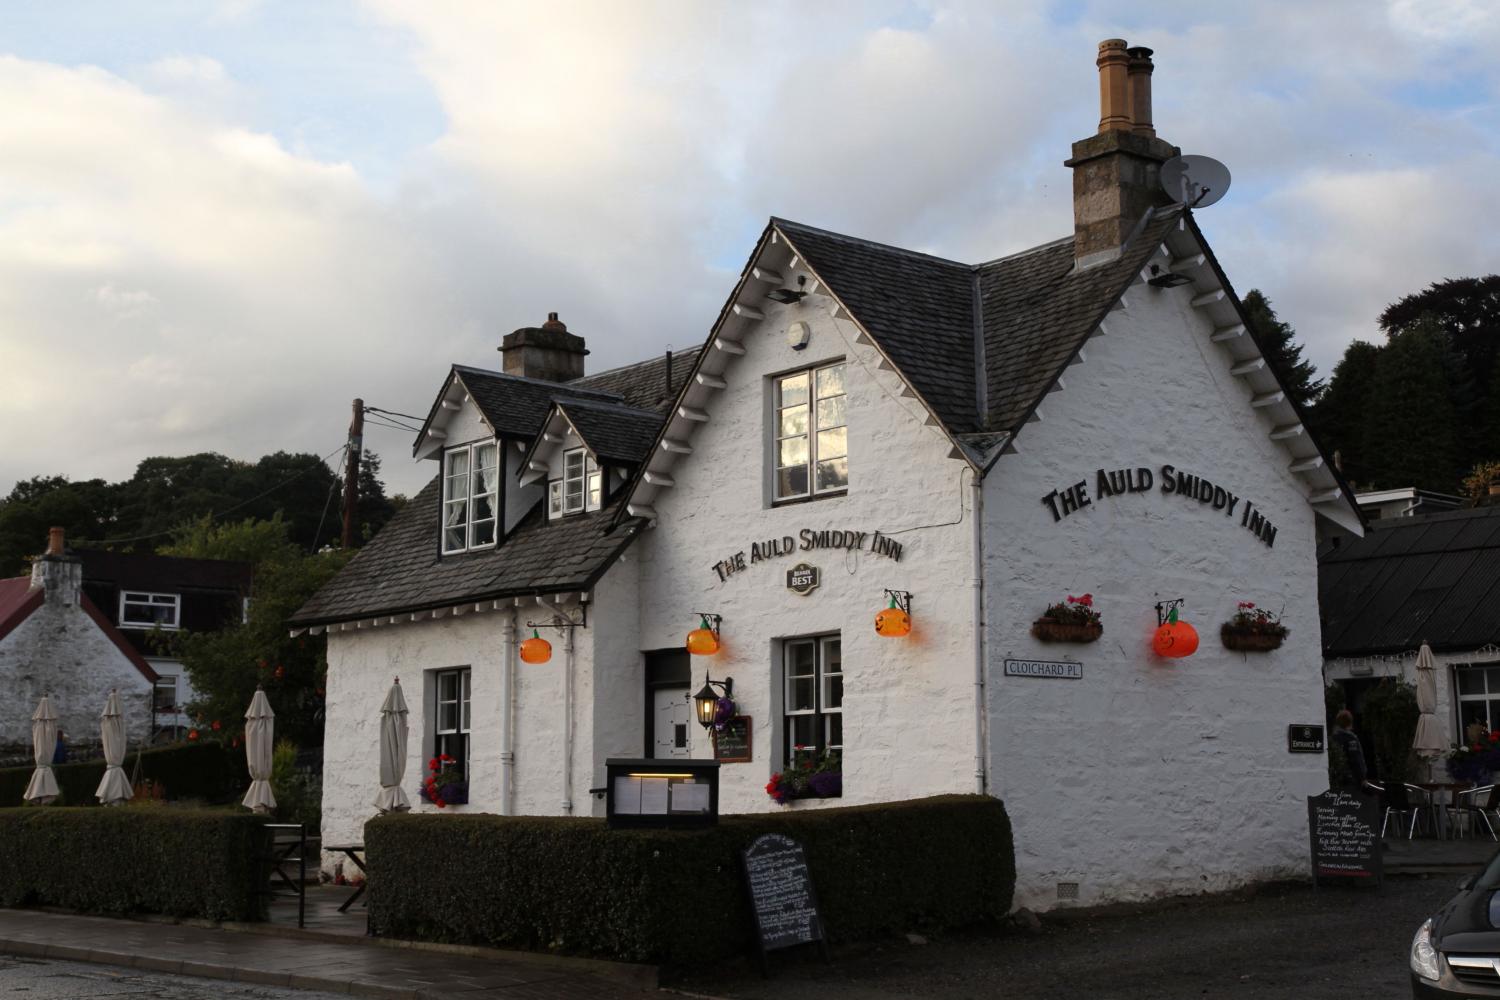 The auld Smiddy Inn in Pitlochry